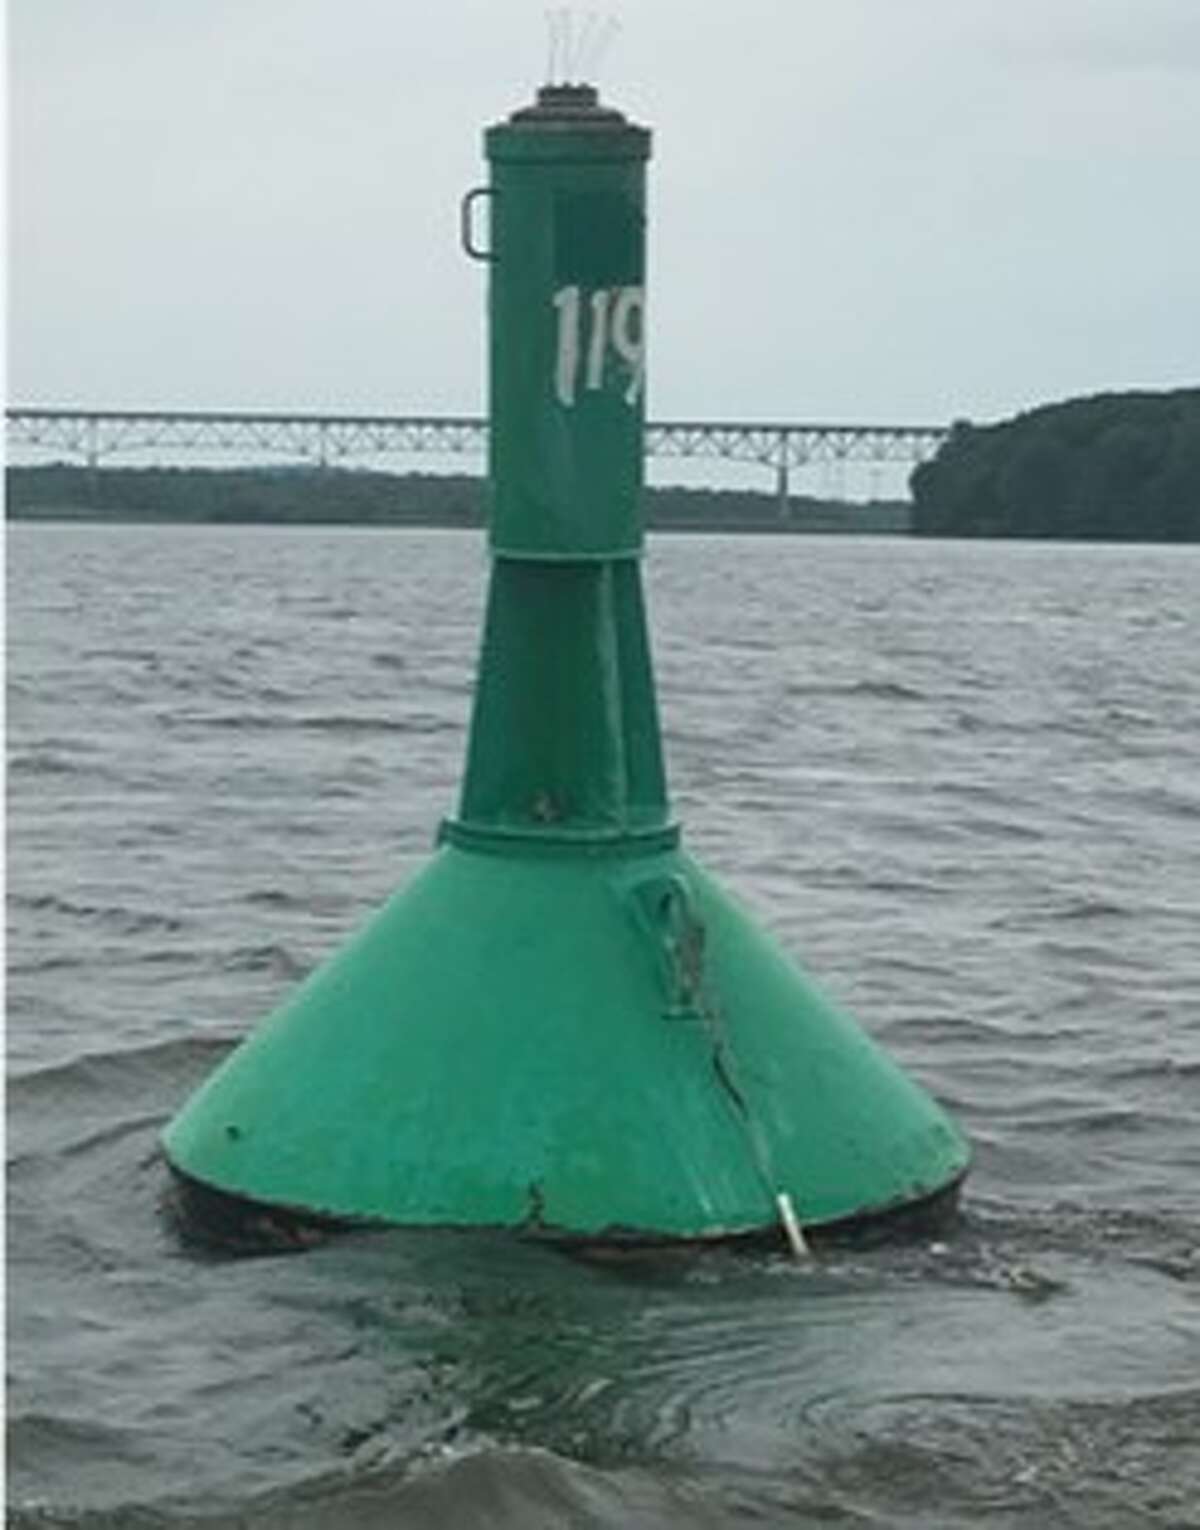 A boat missing for two months after it struck a channel marker on the Hudson River was discovered by a kayaker. And the vessel's owner has been ticketed, the state Department of Environmental Conservation says.